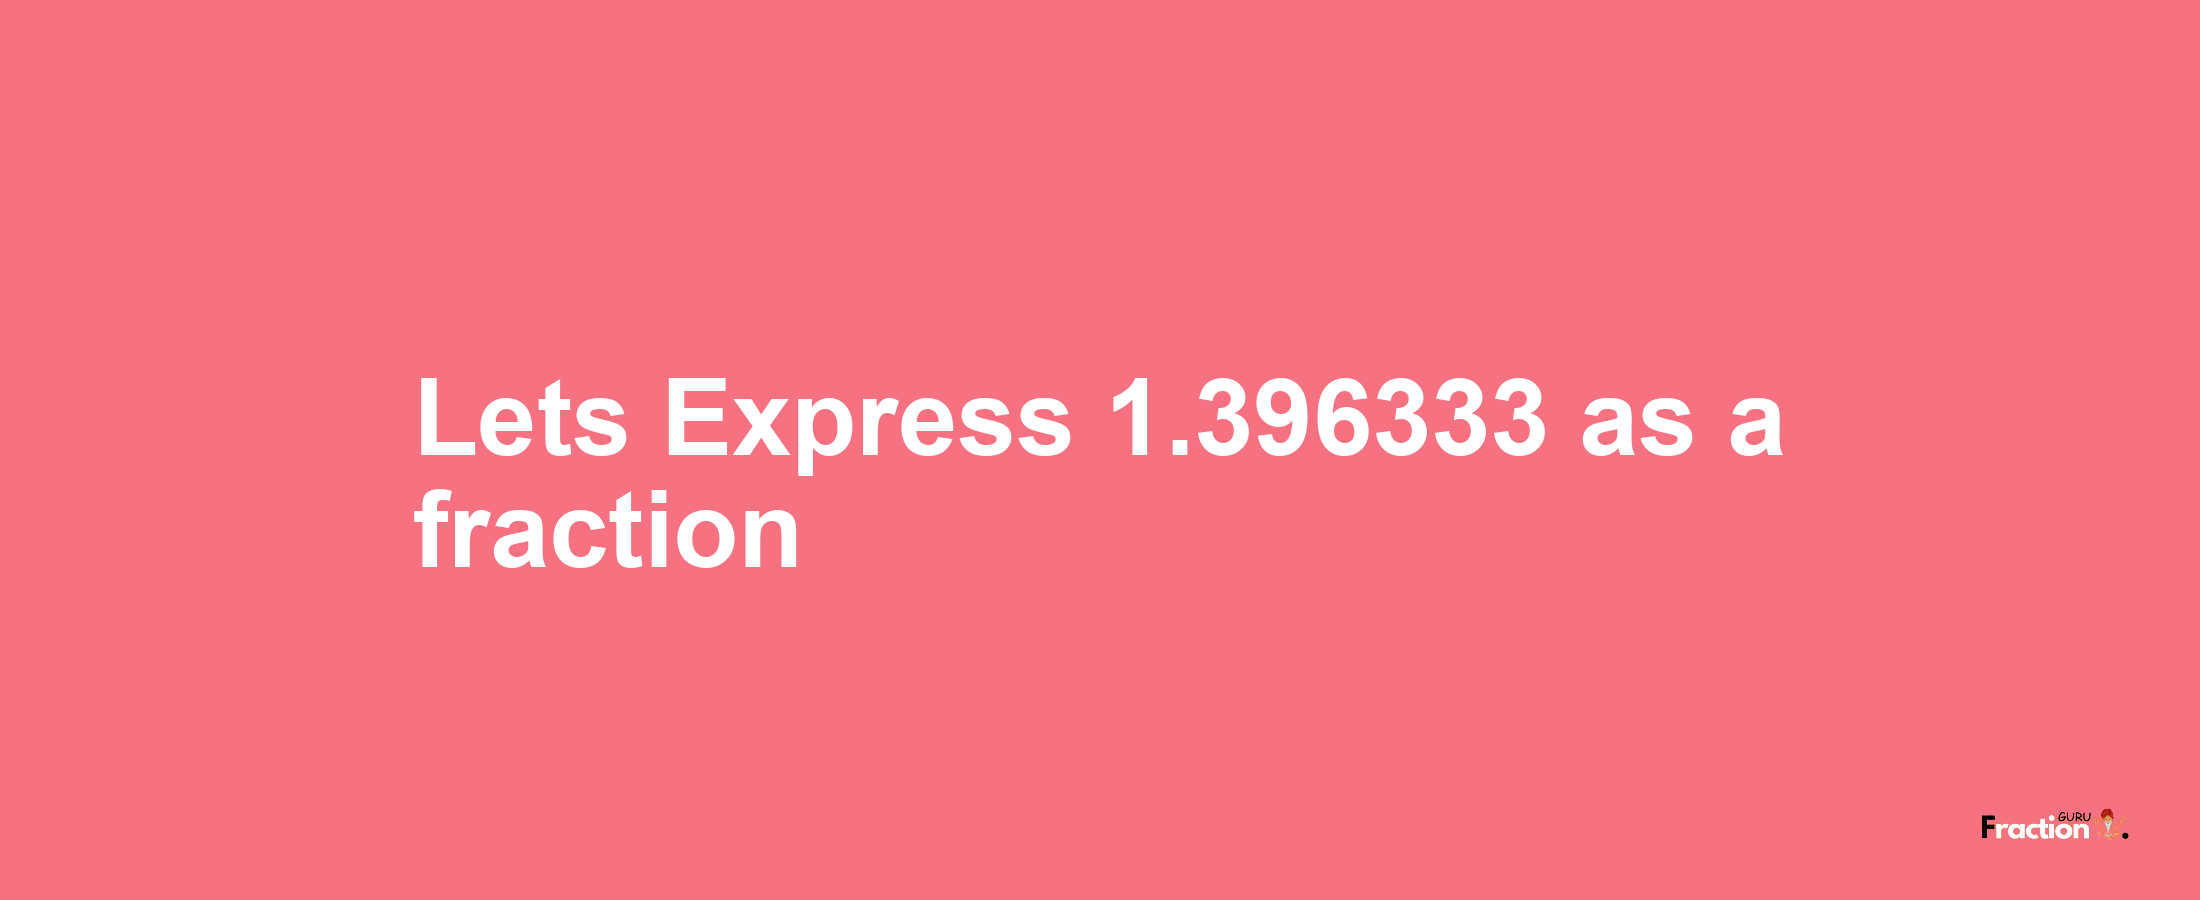 Lets Express 1.396333 as afraction